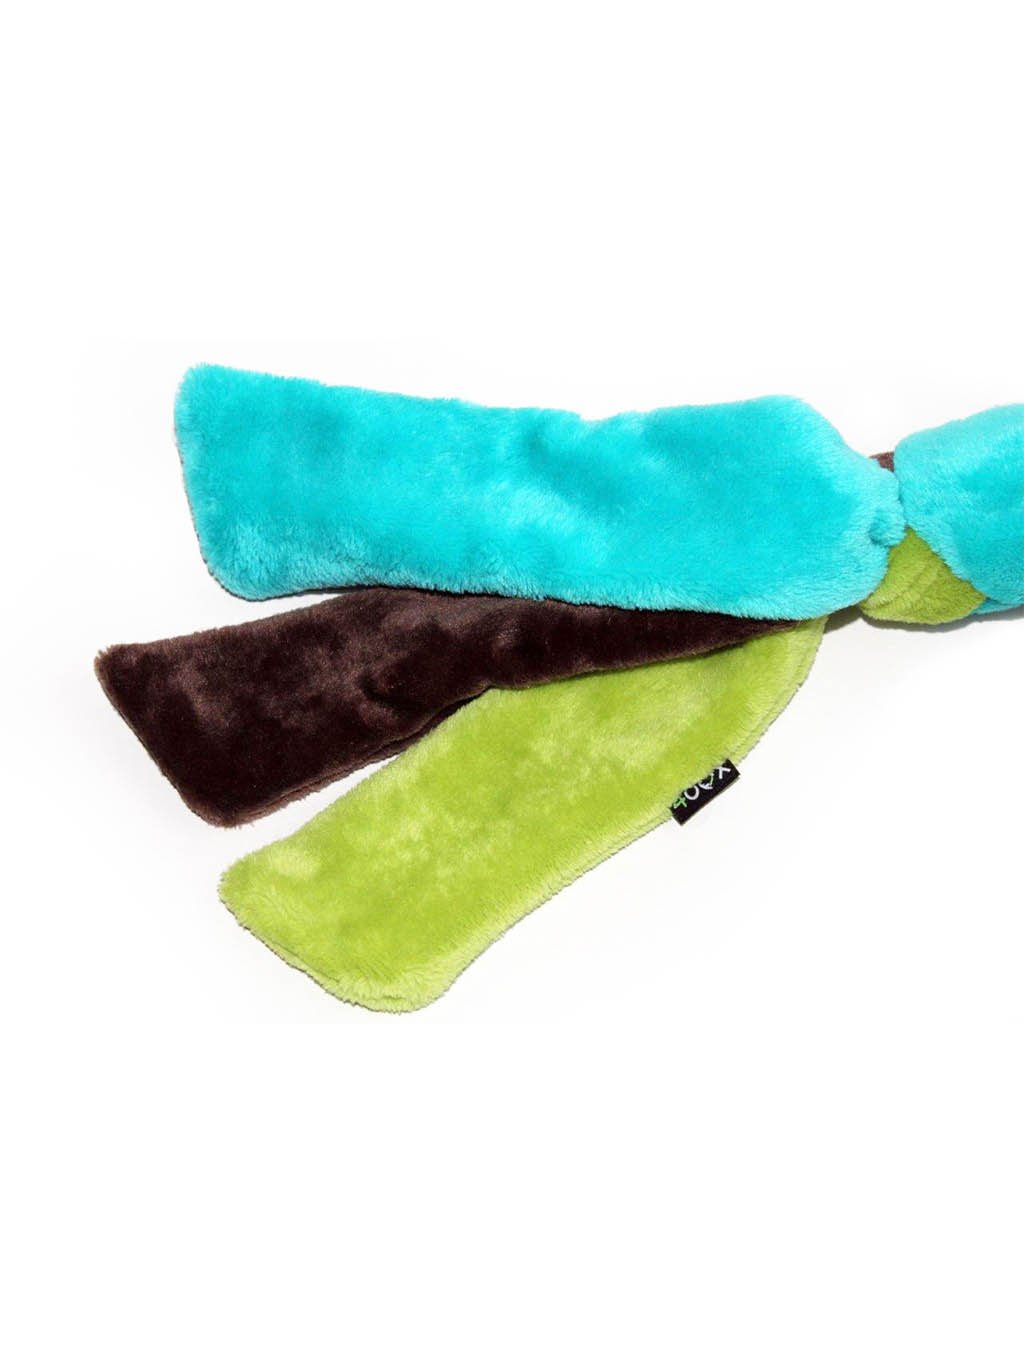 Knitted tug toy - turquoise/lime